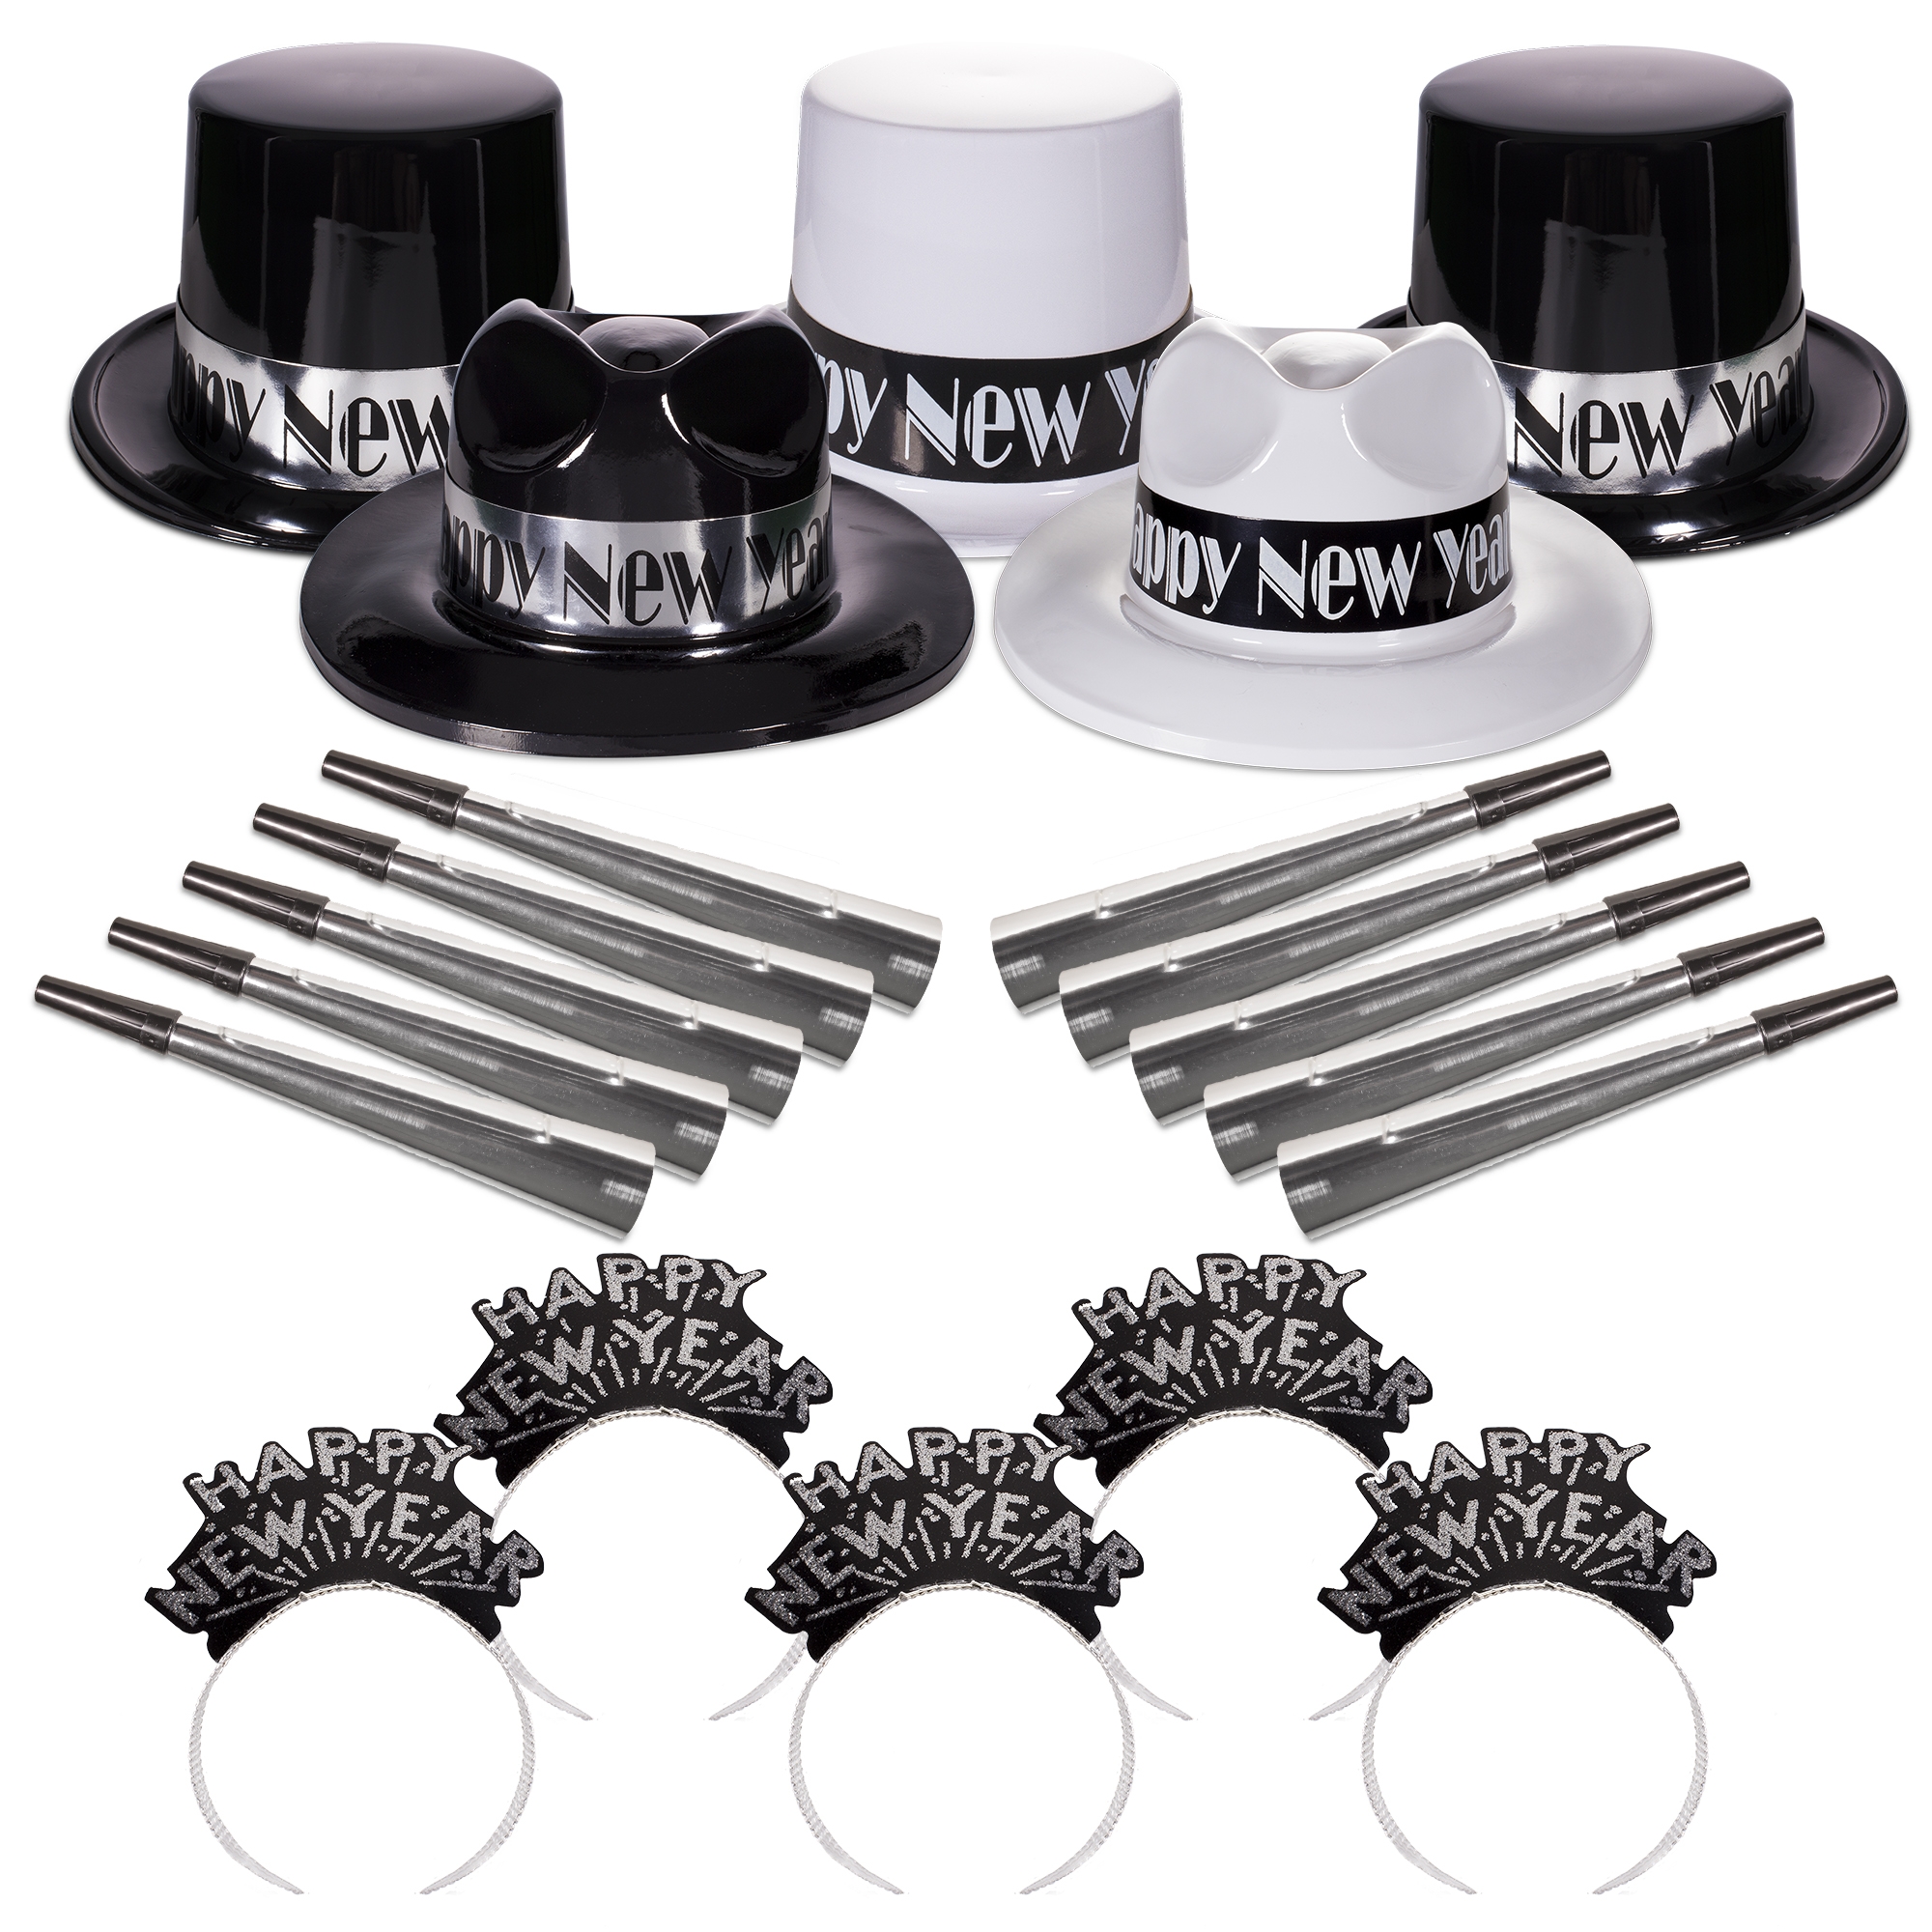 New Year's Jumpin' Jive Party Kit for 100 by Windy City Novelties